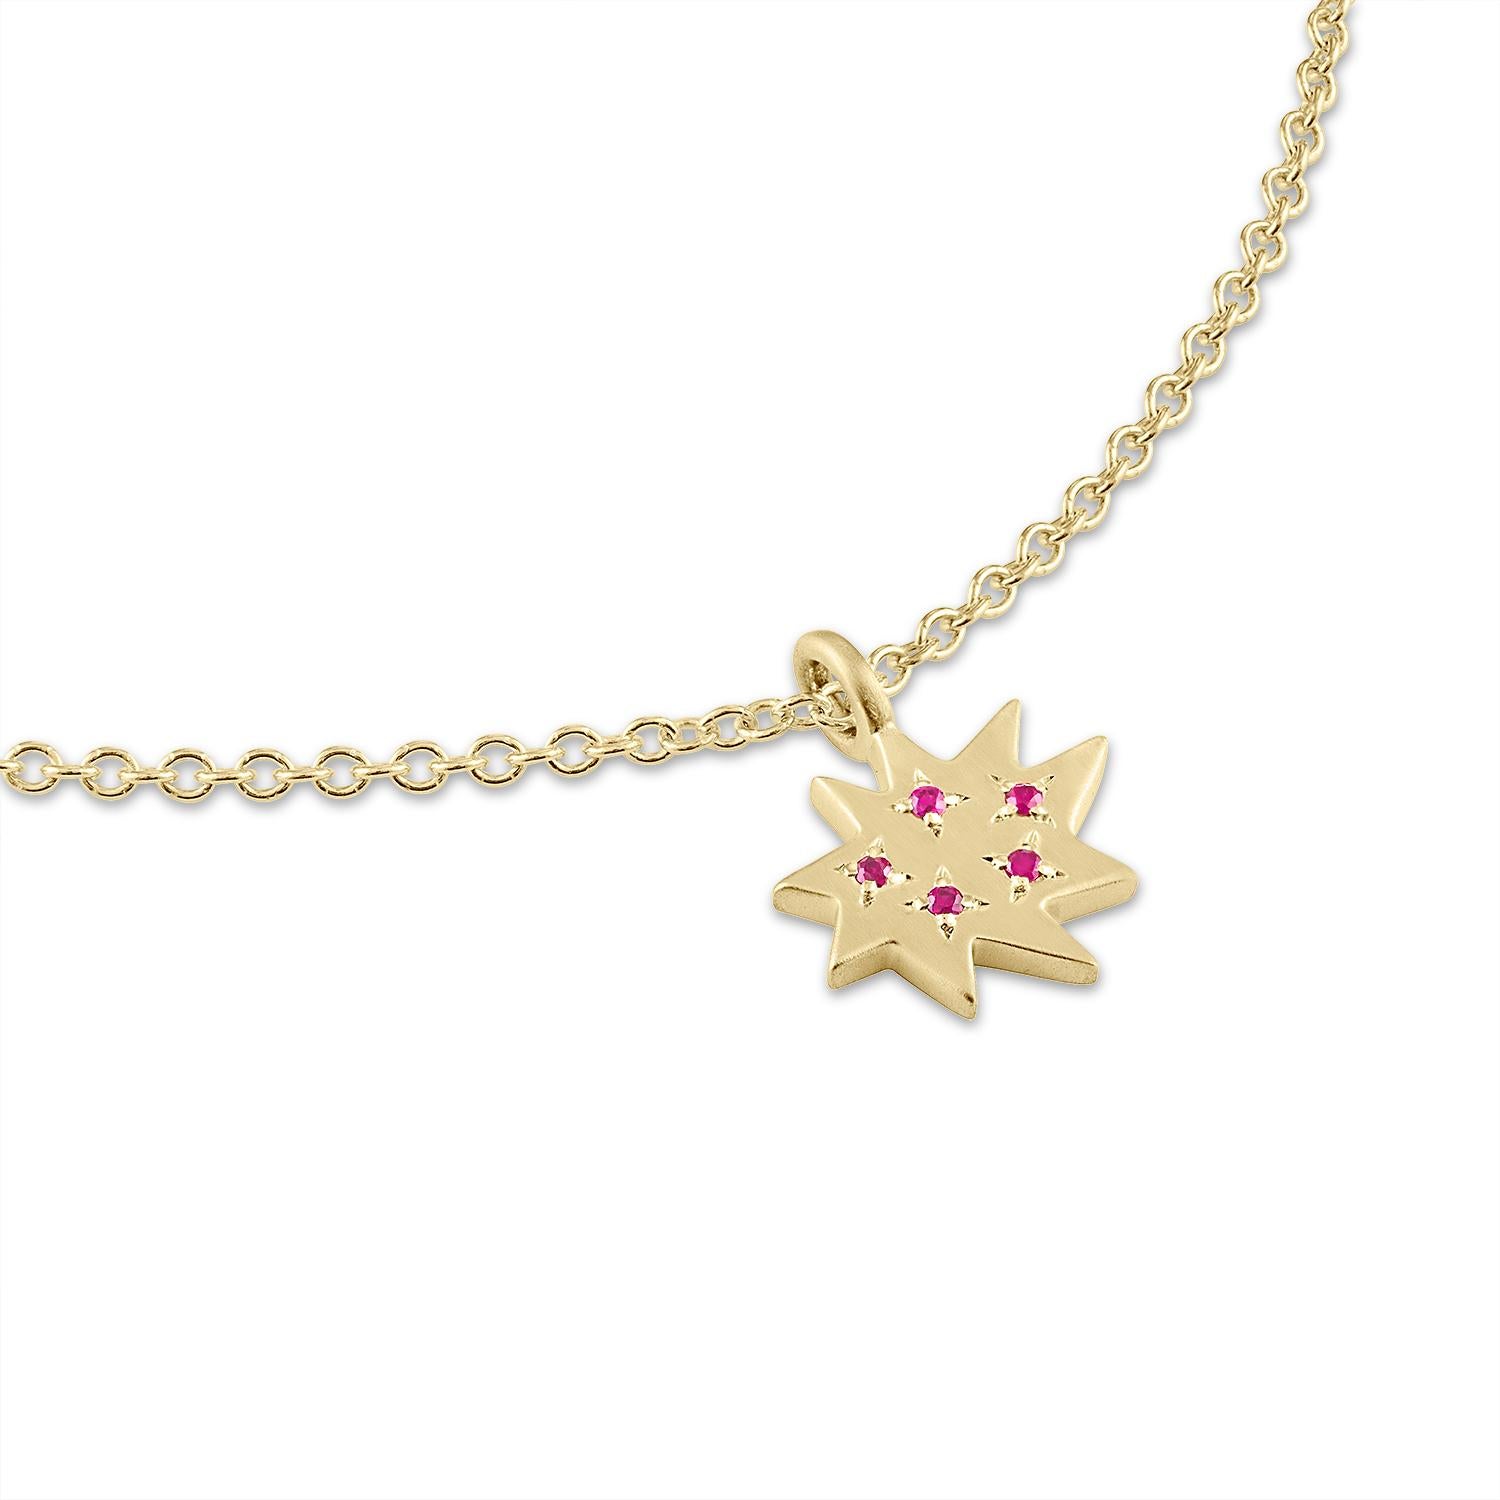 Elegant and adorable! Our Mini Stella Necklace is the perfect piece to layer or wear alone. Our iconic 14k gold organic star in a new delicate size hangs on a 14k gold chain and sparkles with five gorgeous little rubies. 

KAPOW! The Stella